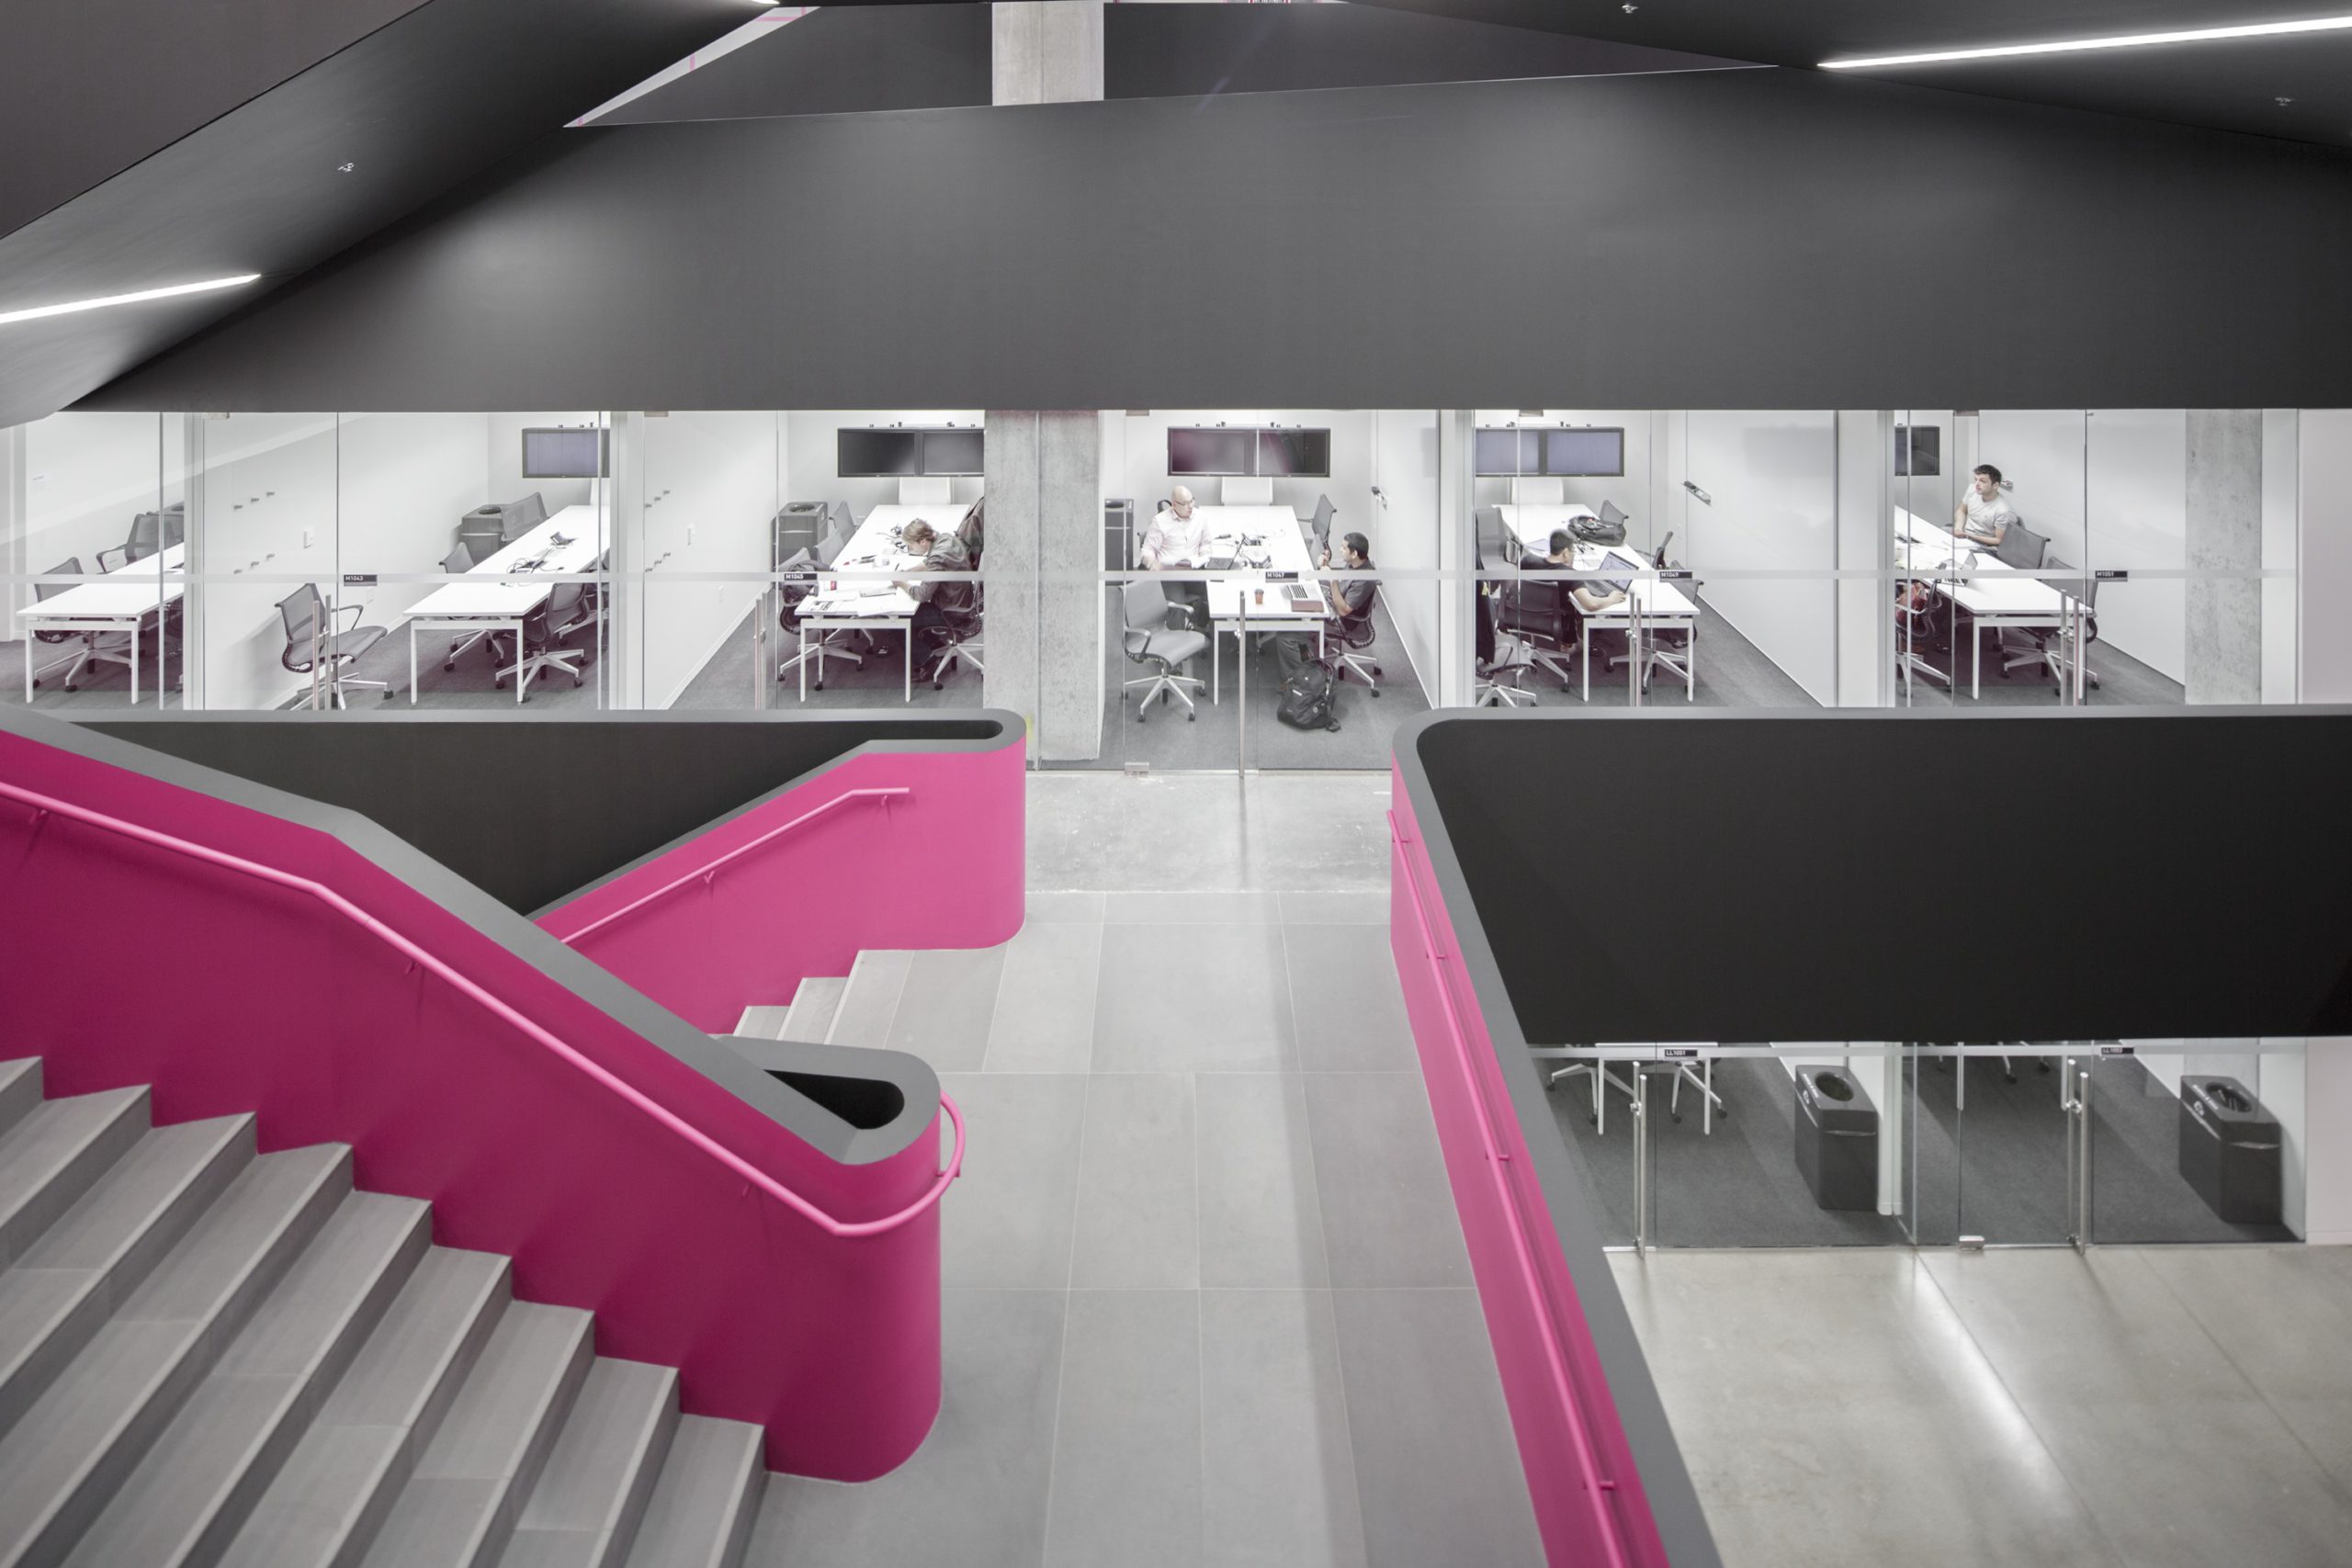 interconnecting stair and small meeting rooms